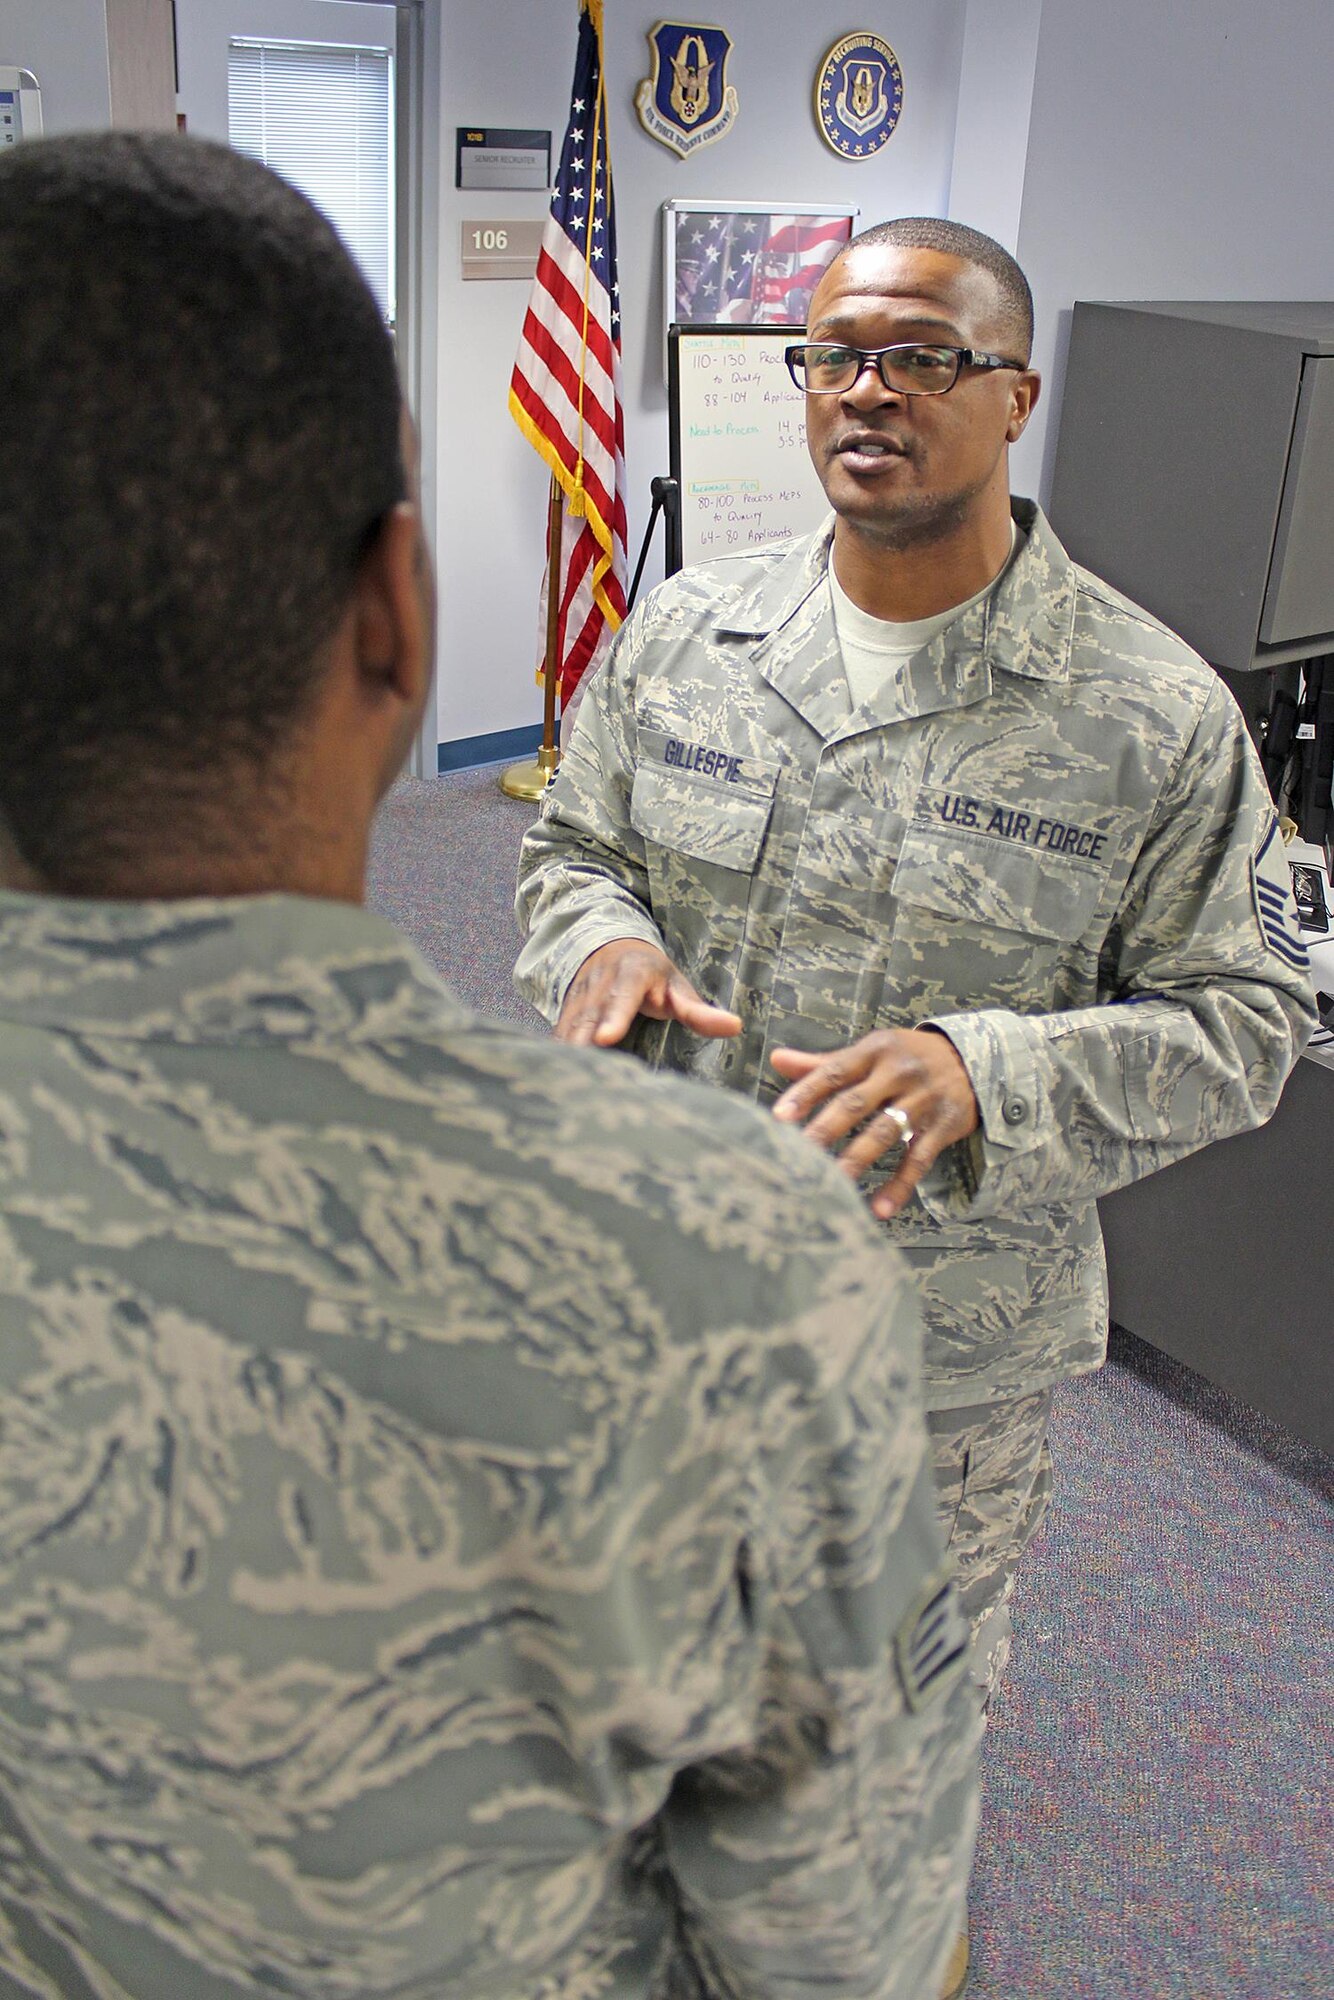 Master Sgt. Charles Gillespie, a member of the 446th Airlift Wing's recruiting team, is the lone Reserve recruiter at Fairchild Air Force Base, Wash. Gillespie is an in-service recruiter, offering Reserve opportunties to Airmen leaving the active-duty Air Force.